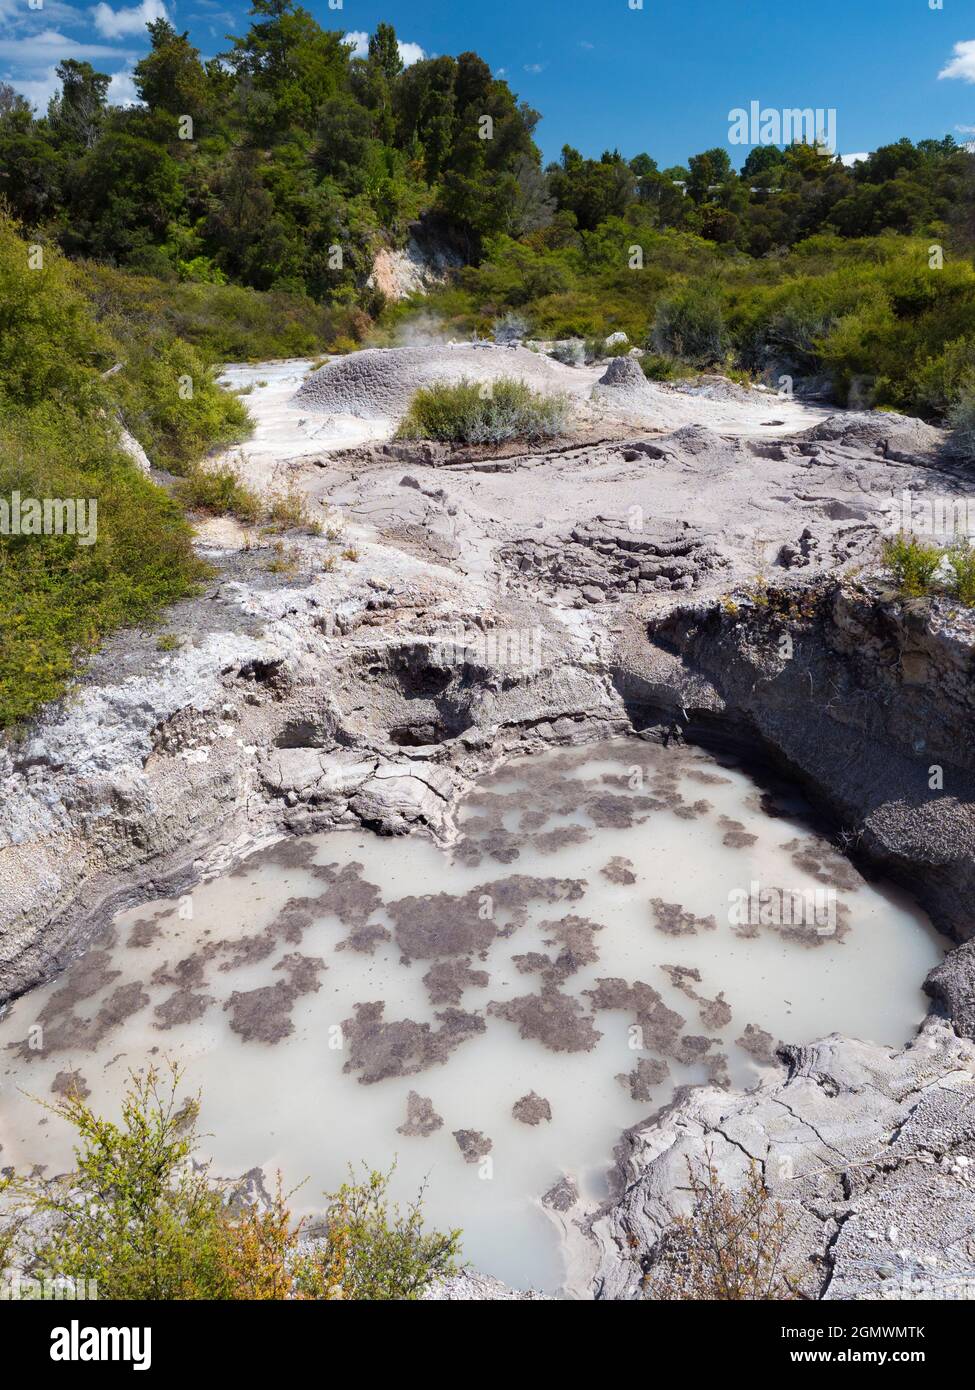 Rotorua, New Zealand - 1 March 2019;   Rotorua in New Zealand's North Island is an extended area packed with geothermal vents, boiling mud springs, su Stock Photo